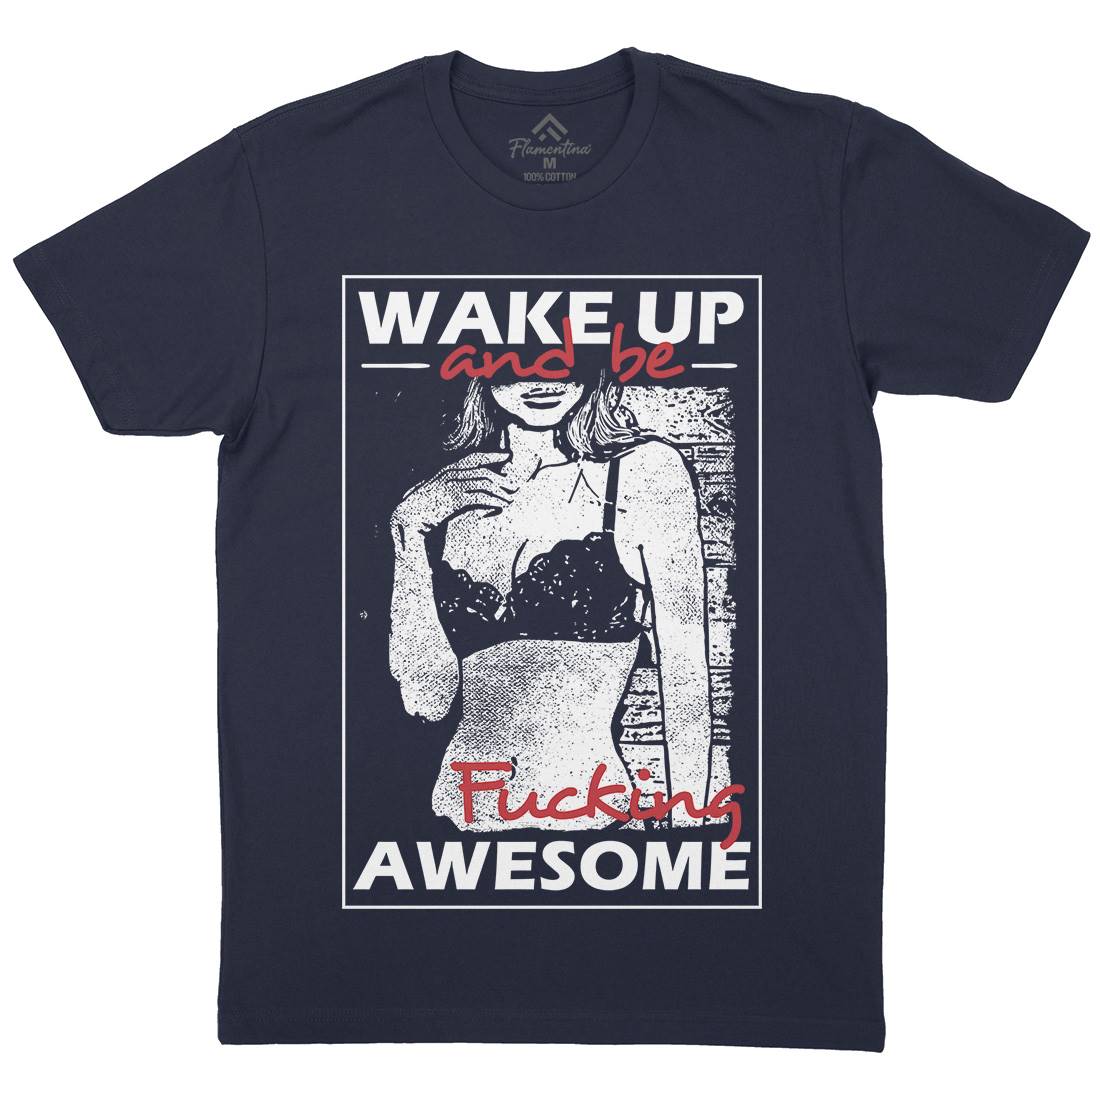 Wake Up And Be Awesome Mens Crew Neck T-Shirt Gym C993